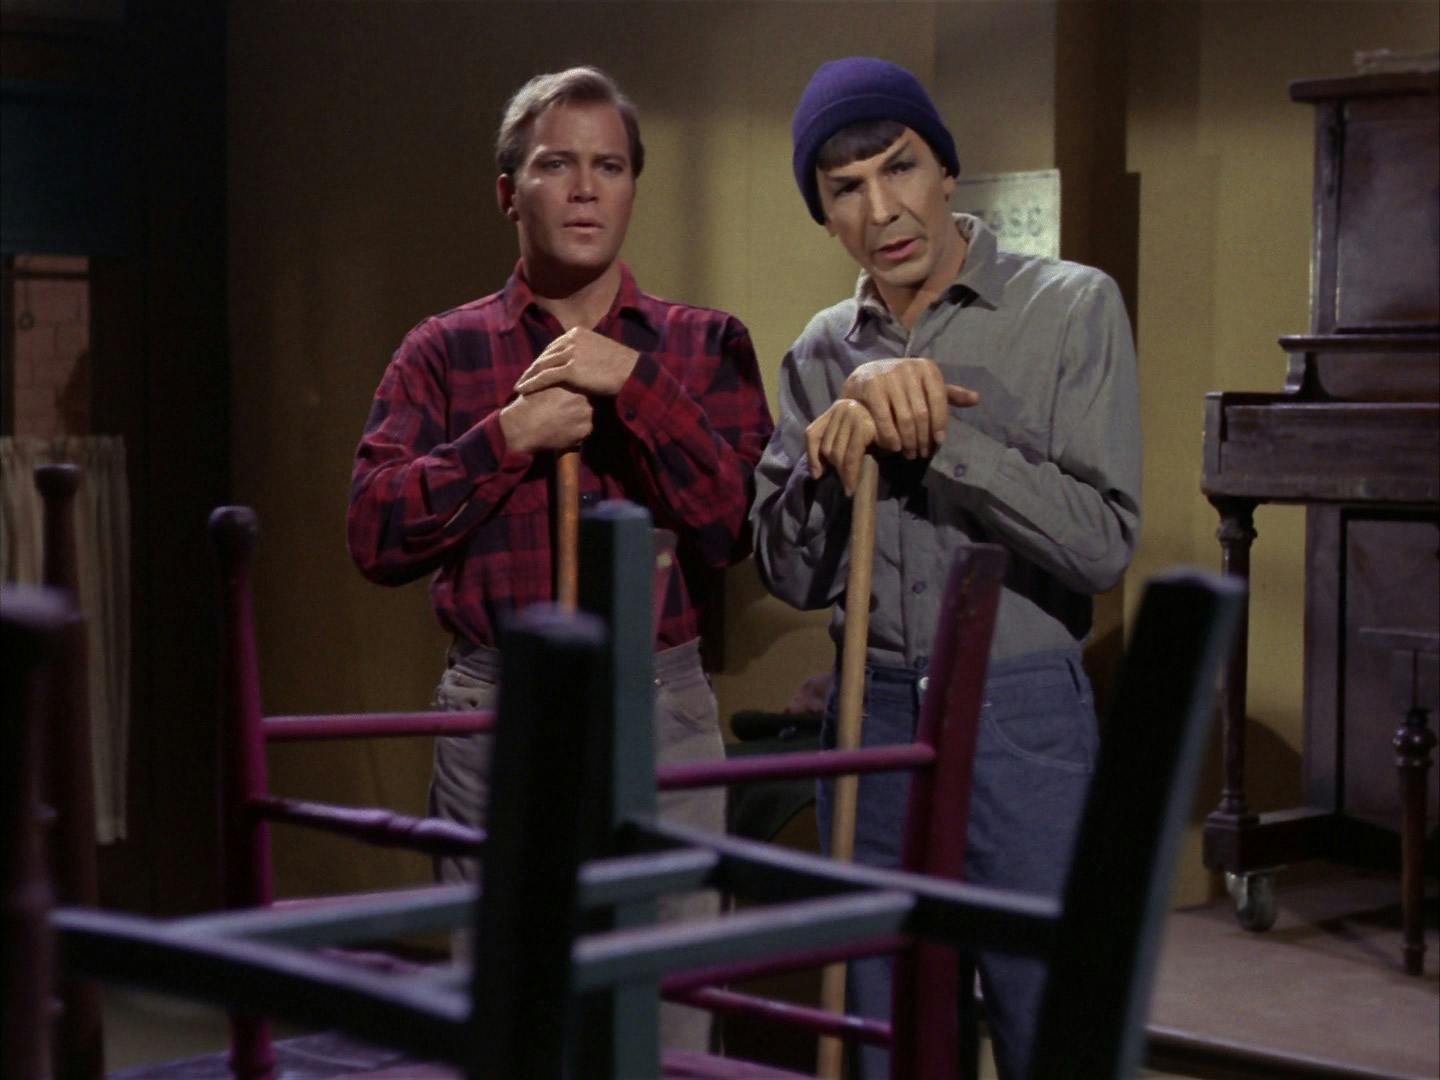 Kirk and Spock in civilian Earth clothes pause on a couple brooms in 'The City on the Edge of Forever'